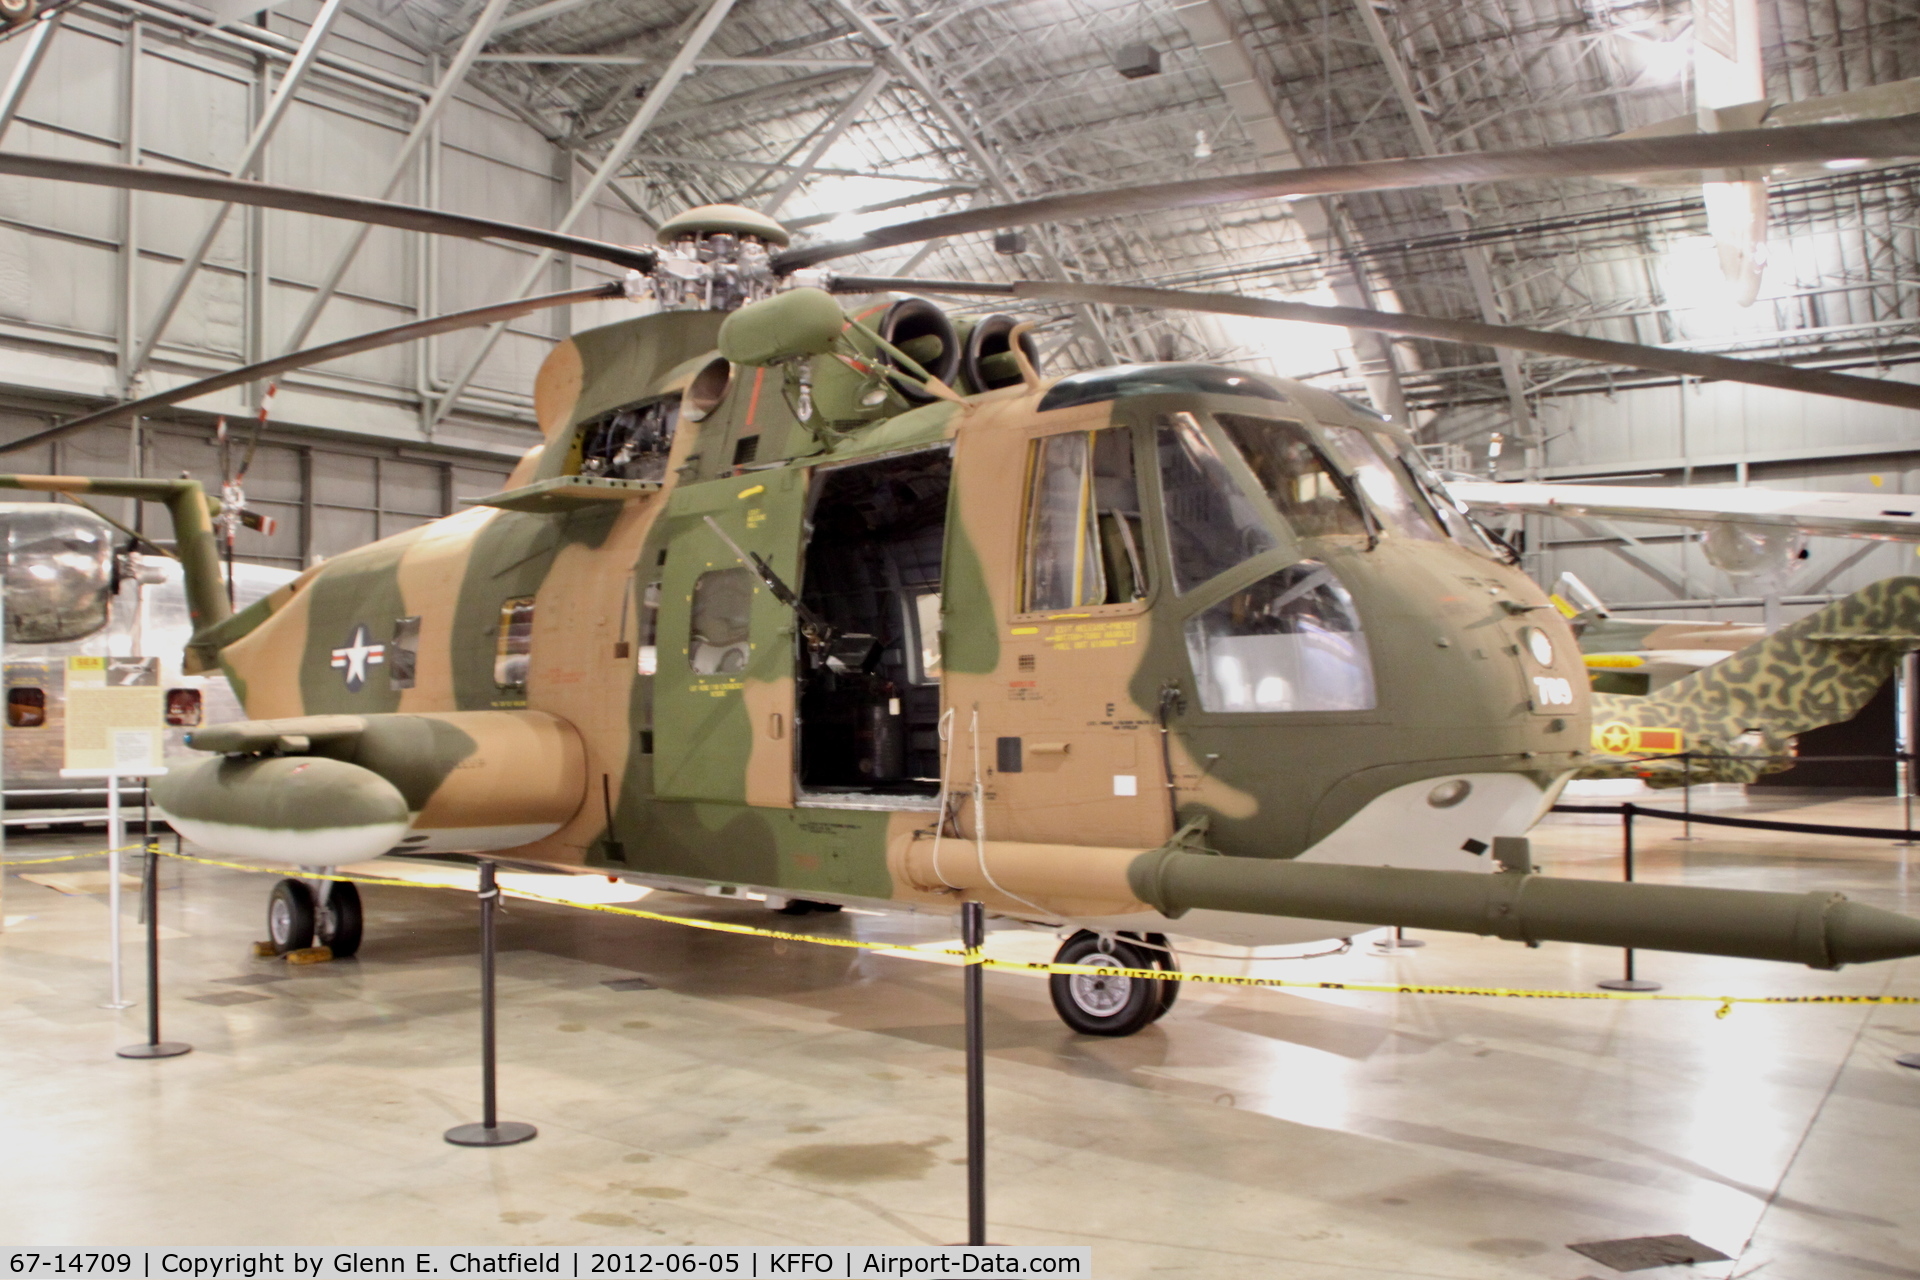 67-14709, 1967 Sikorsky HH-3E Jolly Green Giant C/N 61-611, At the Air Force Museum